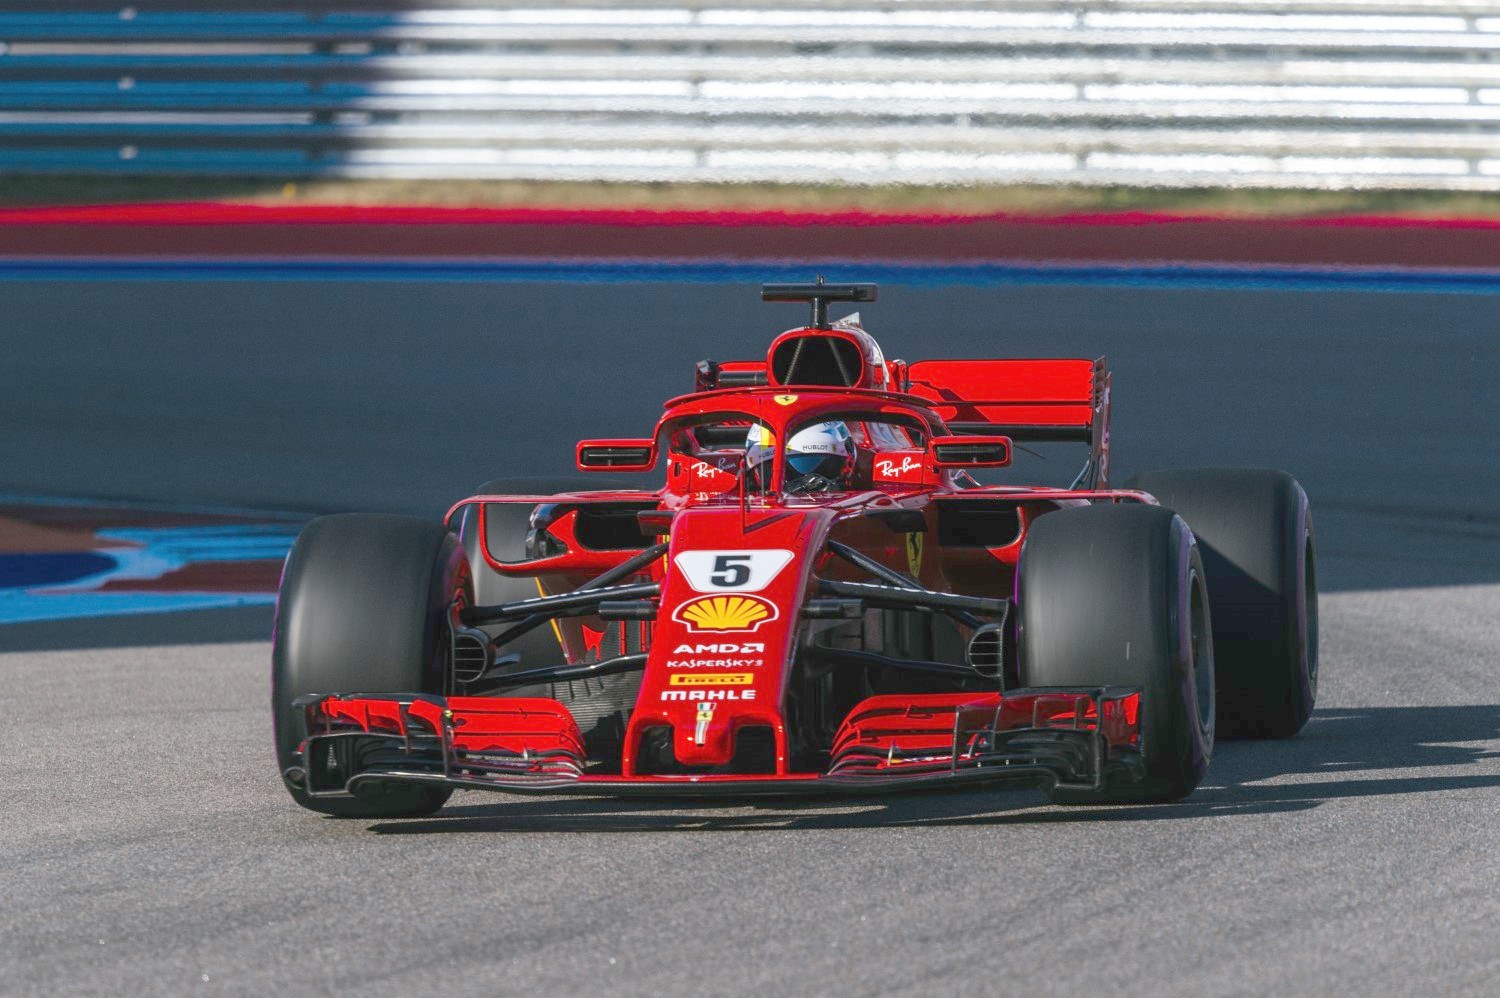 Vettel's Ferrari is simply no match for the Mercedes